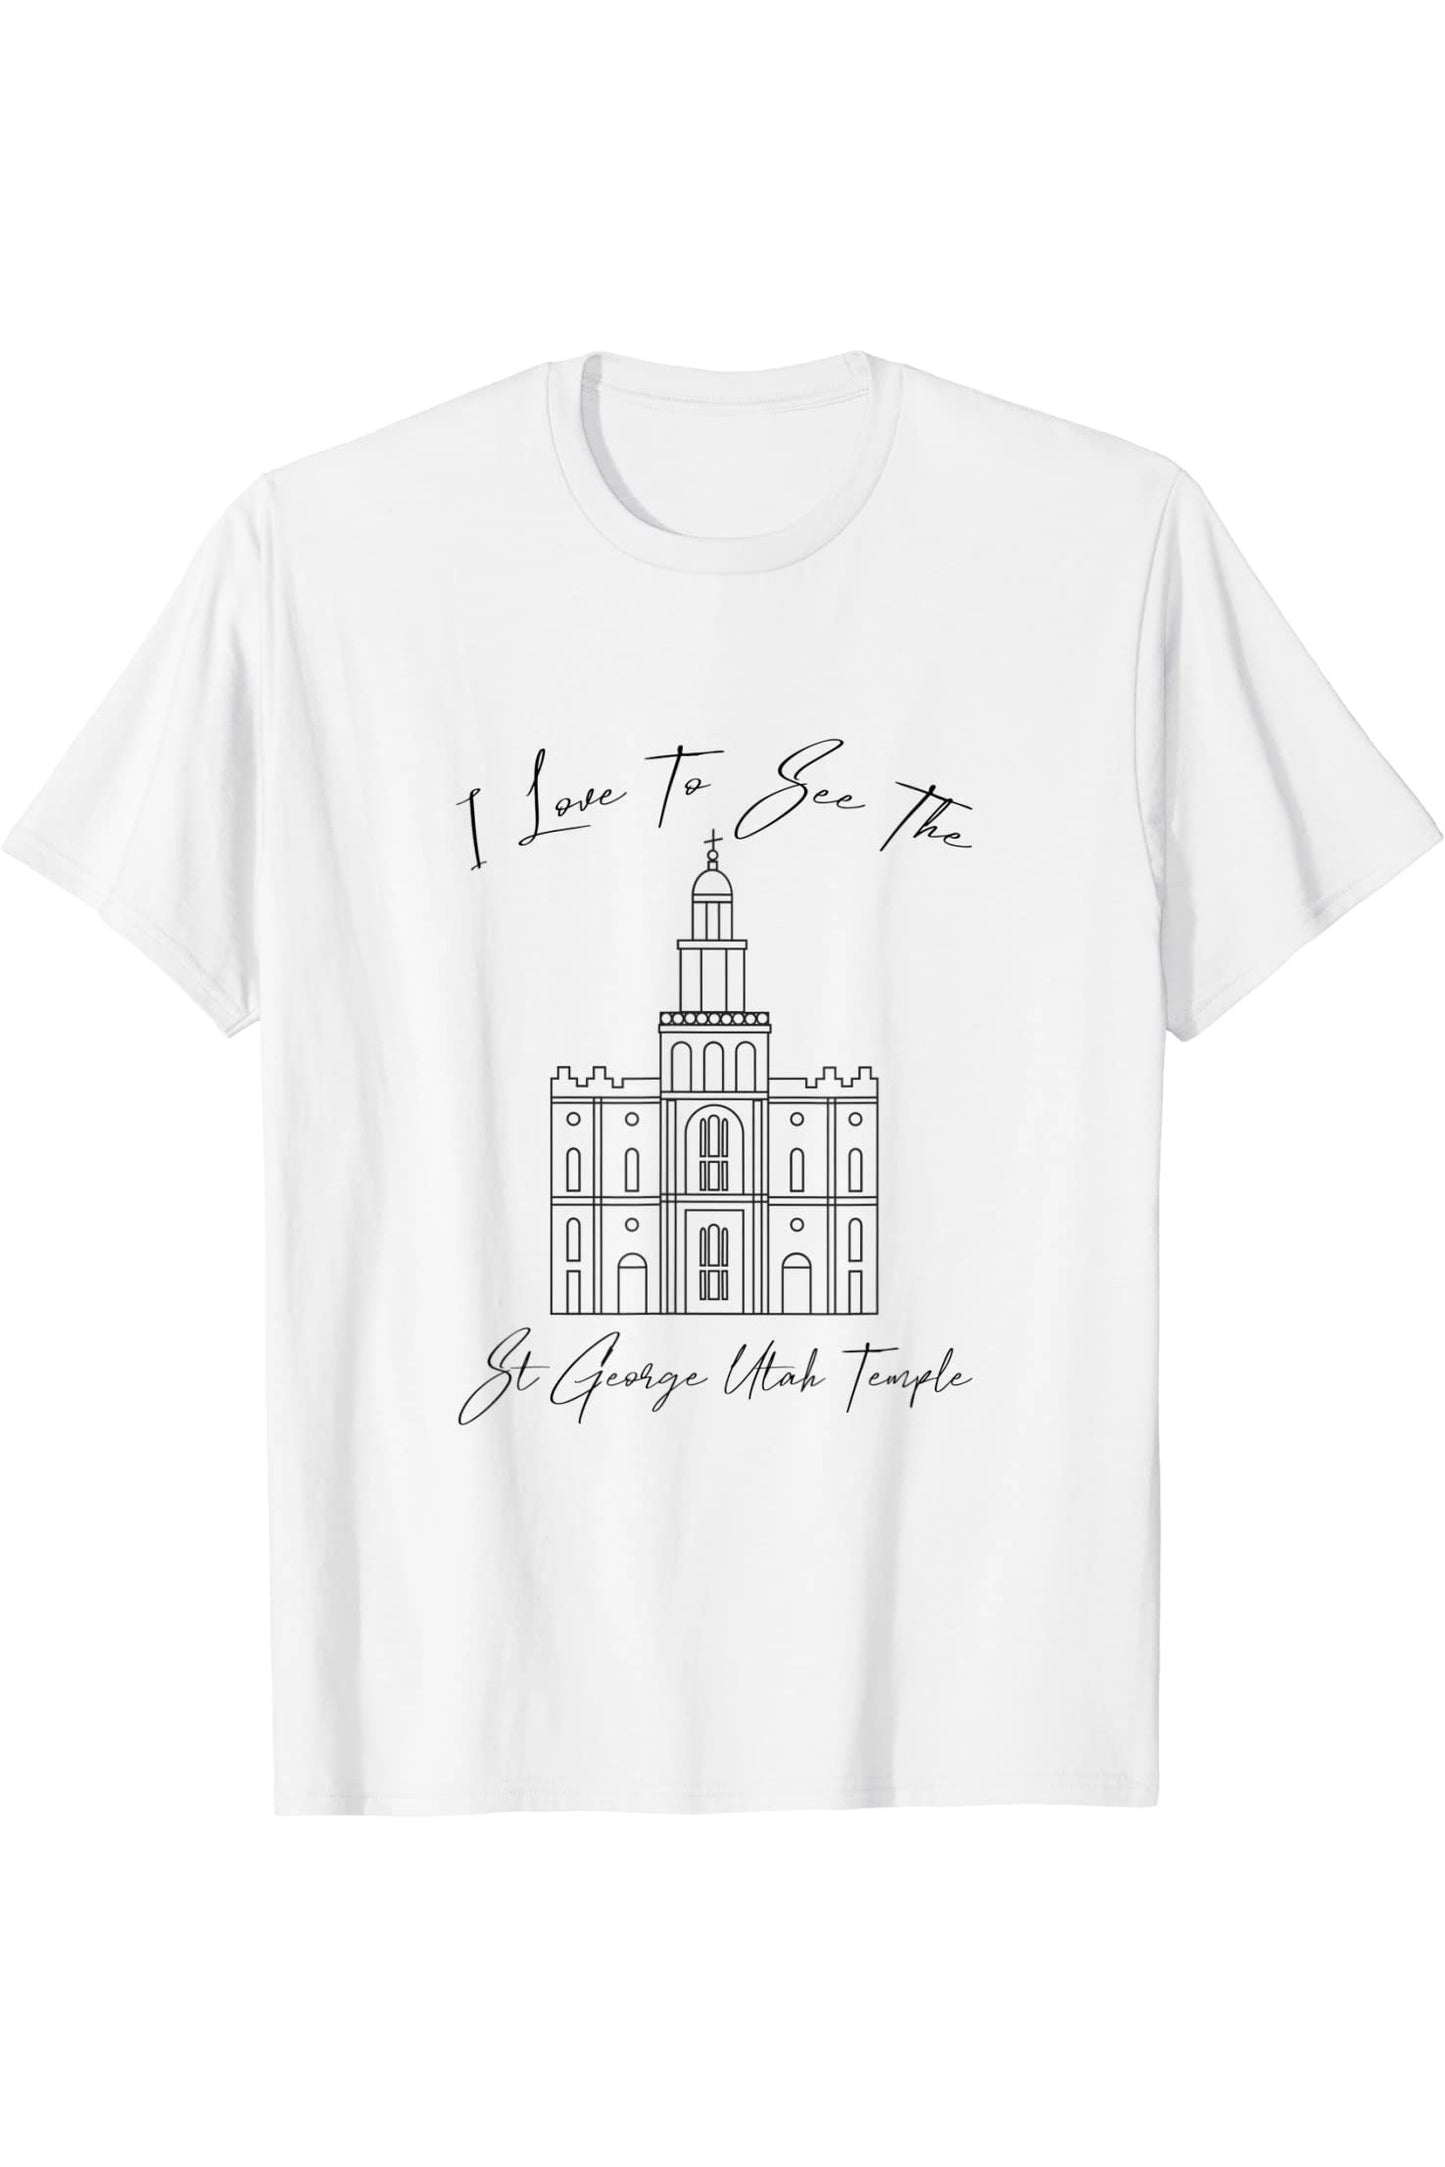 St George Utah Temple T-Shirt - Calligraphy Style (English) US